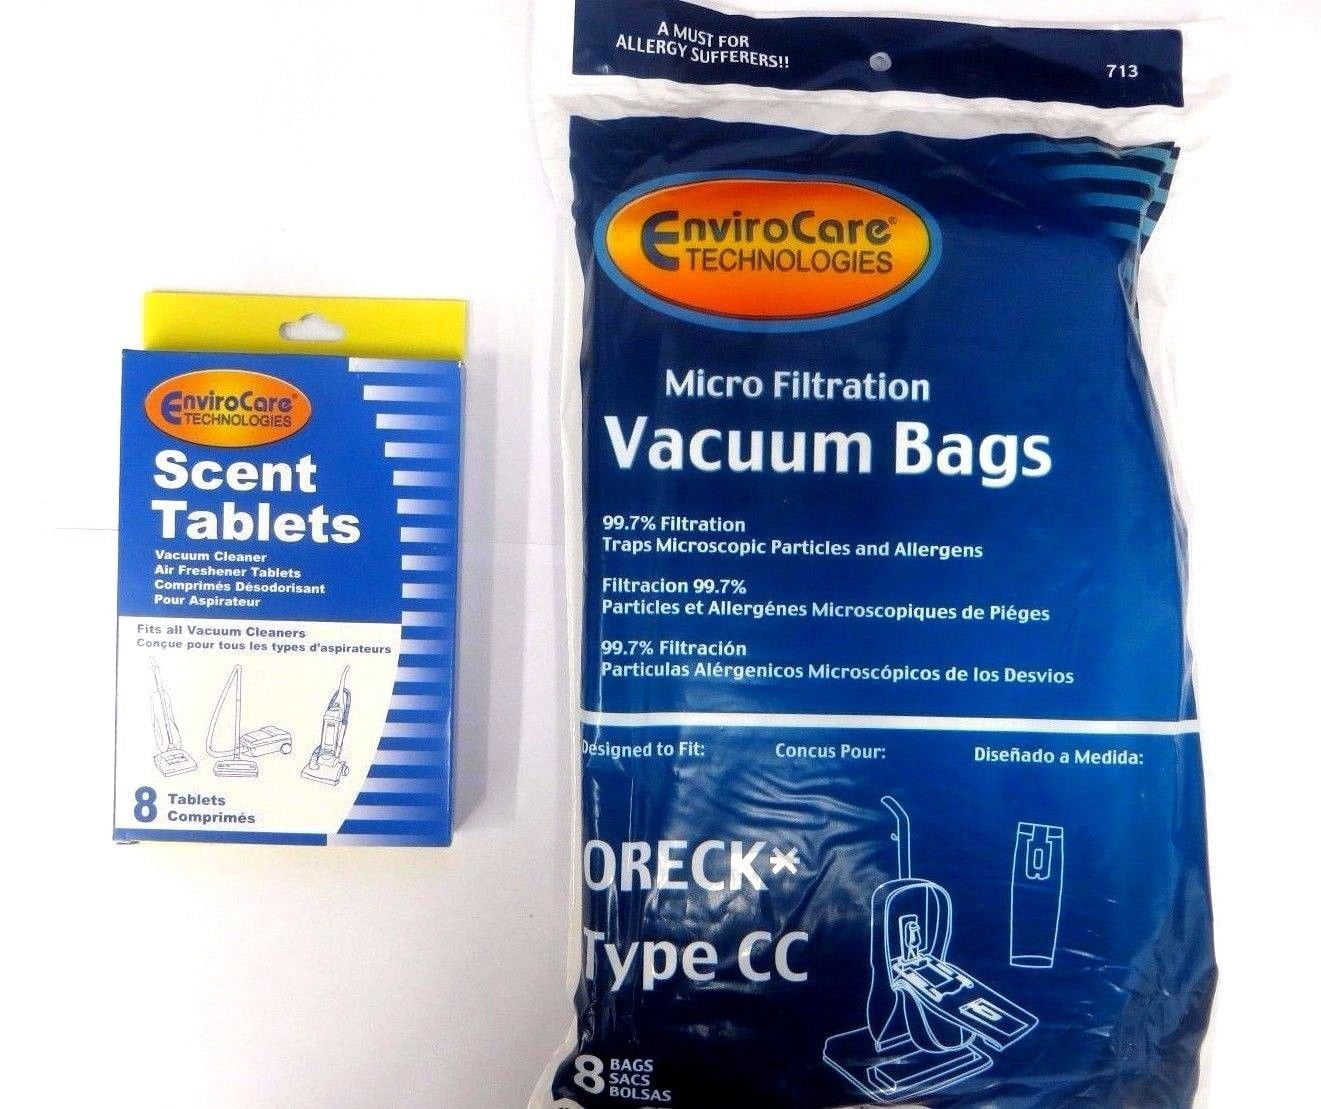 Envirocare-Oreck Vacuum Bags Models 2000 8000 9000 Micro Filtration By 